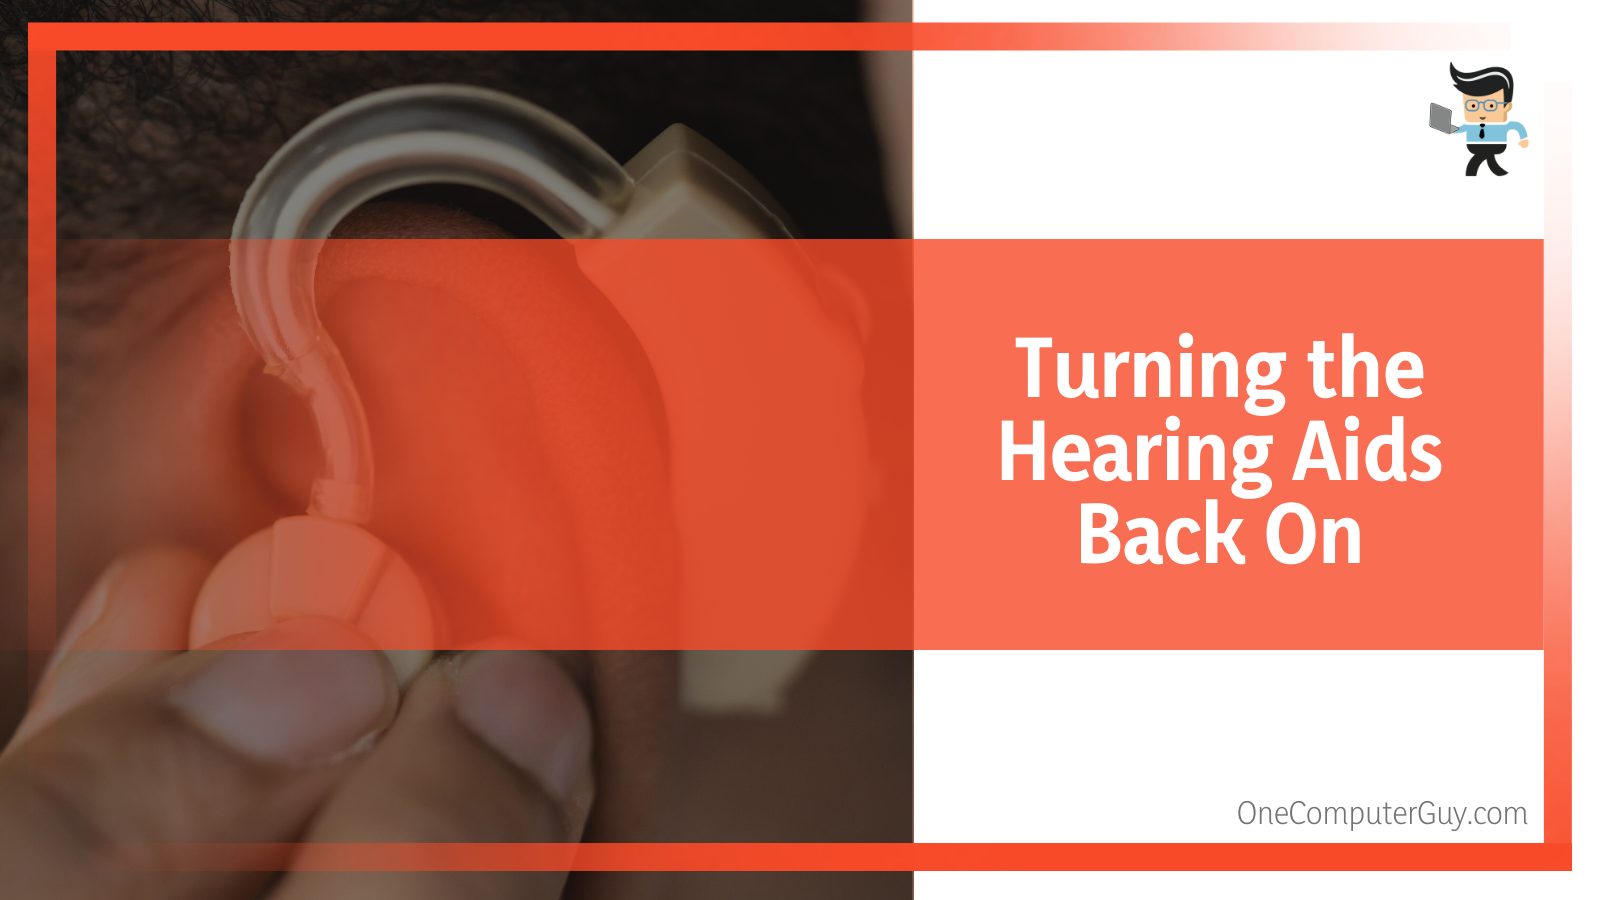 Turning the Hearing Aids Back On